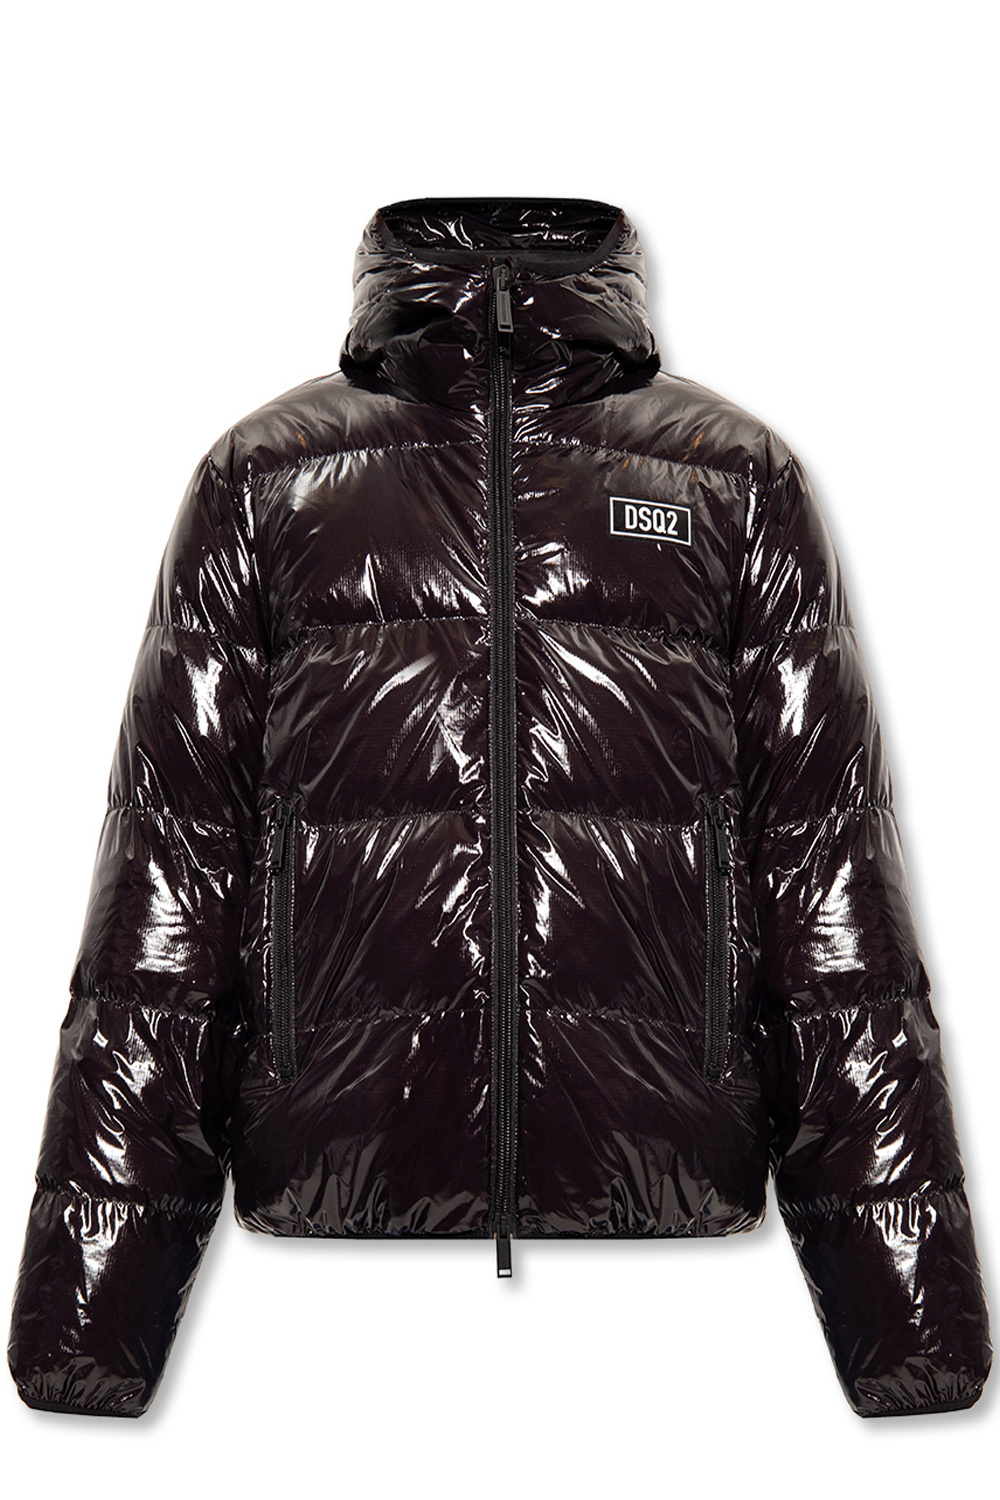 Dsquared2 Hooded plenty fitted jacket